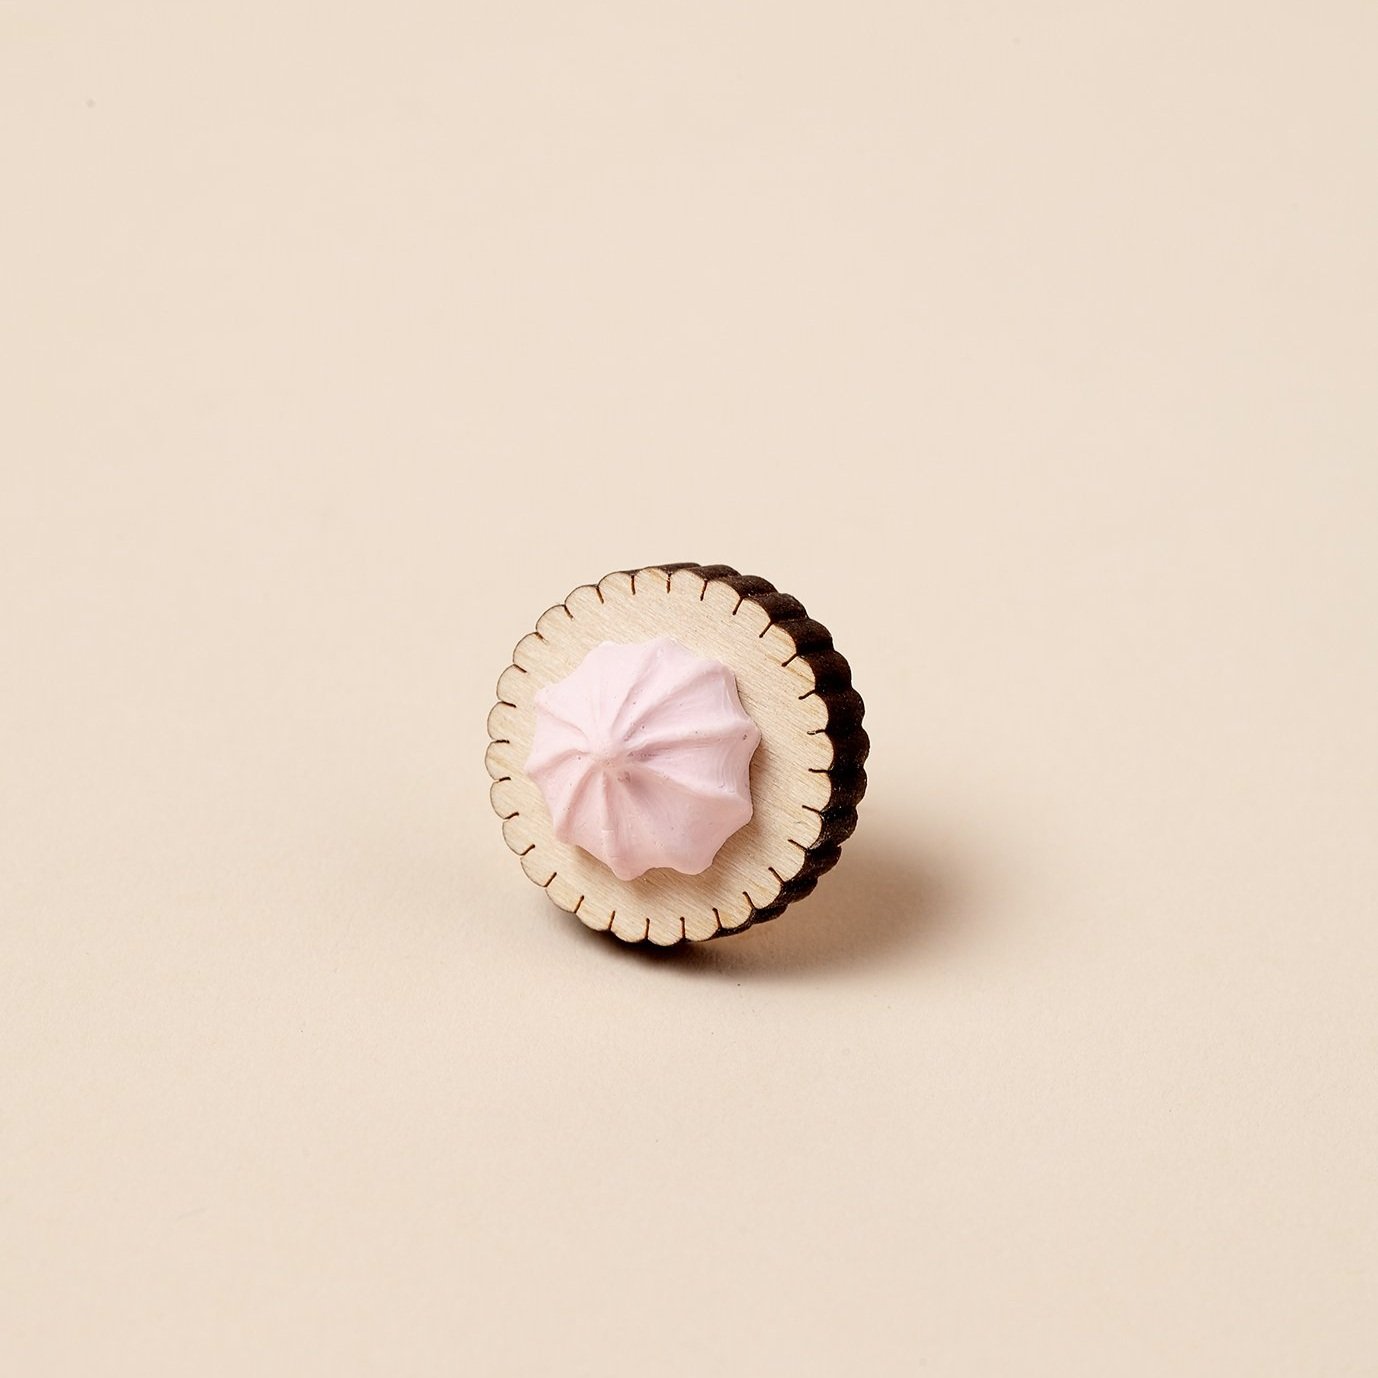 Dunked UK Pink Iced Gem Pin